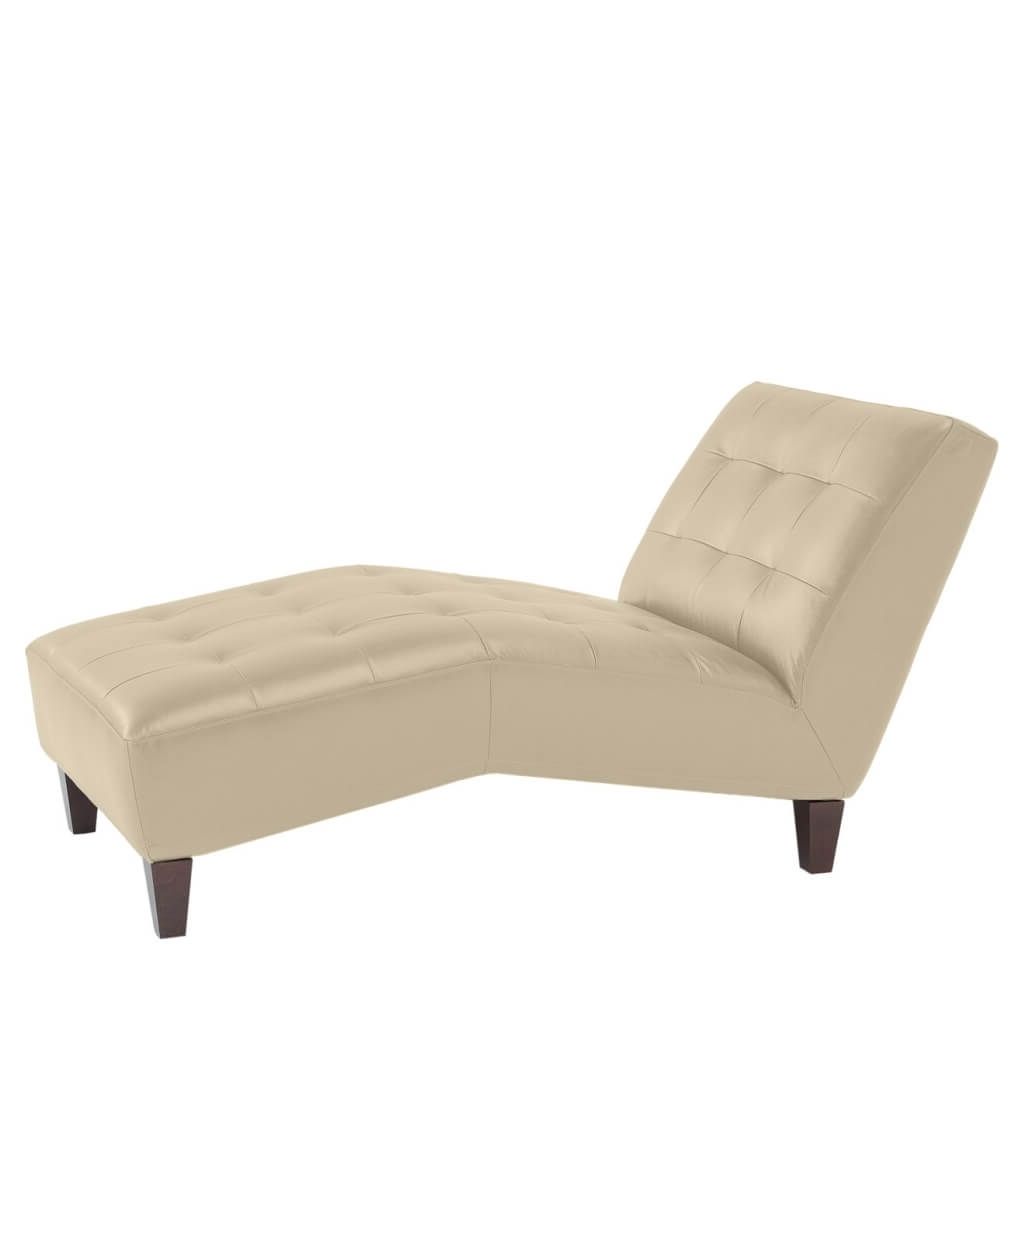 Well Known Alessia Chaise Lounge Tufted Chairs Intended For Furniture: Tufted Chaise Ideas For Your Living Room Furniture (View 10 of 15)